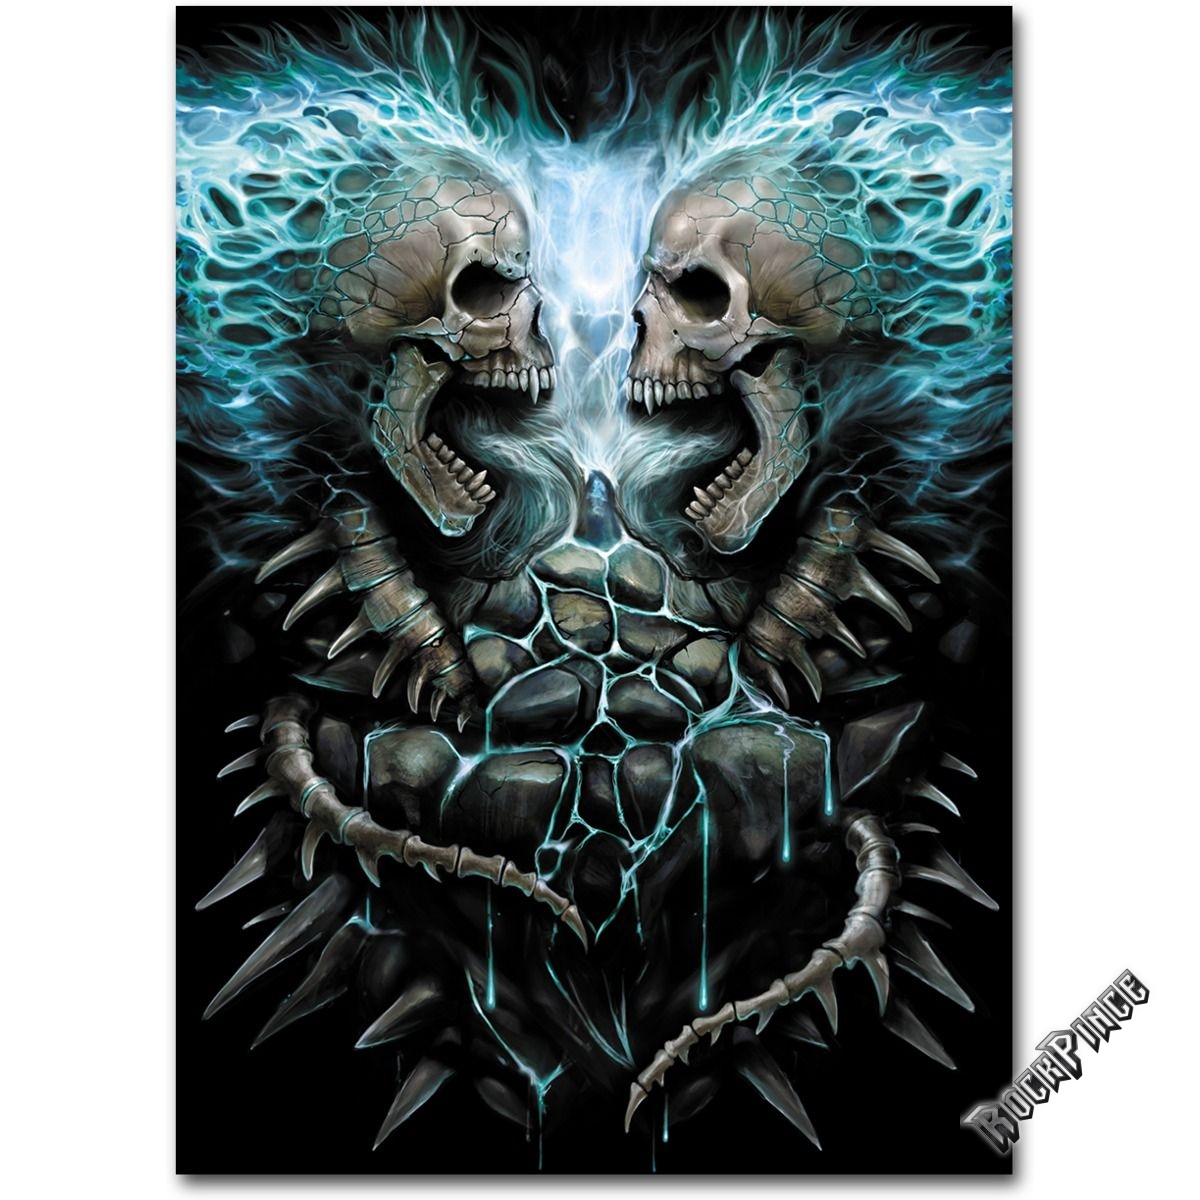 FLAMING SPINE - Poster 62x92cm - W016A151